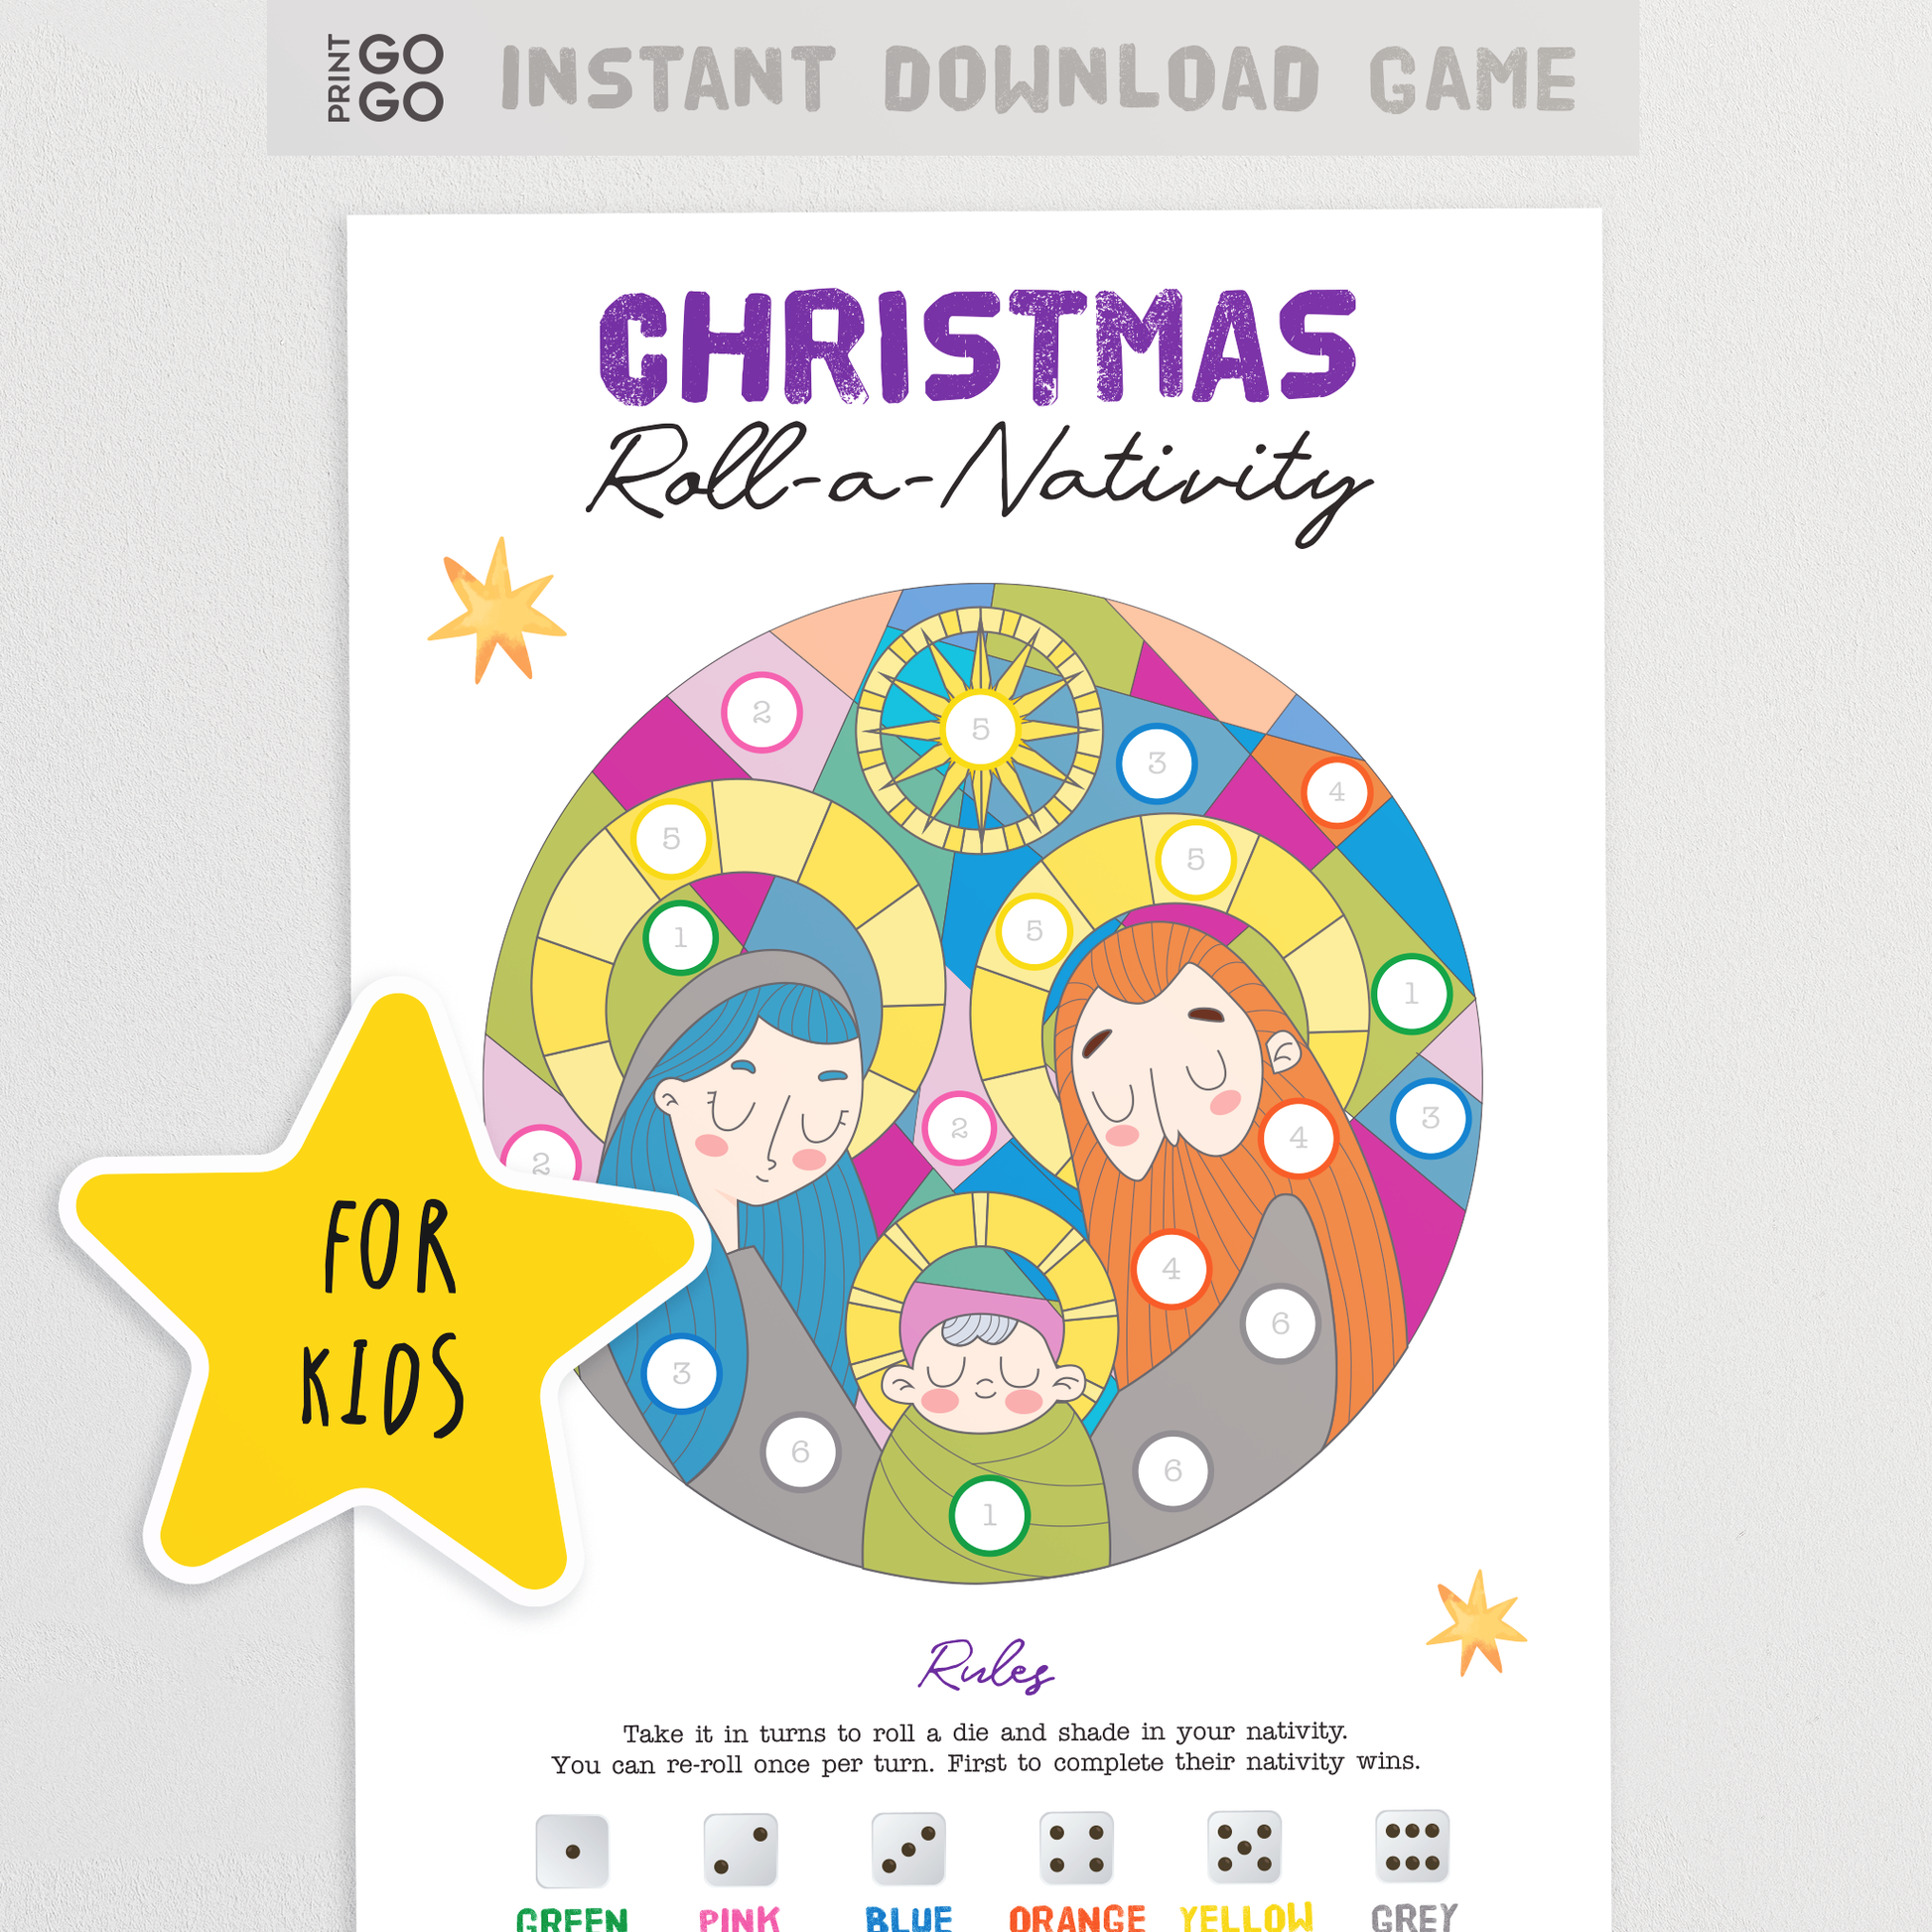 Roll A Nativity Christmas Dice Game - The Fun Christian Holiday Party Game for Kids | Family Dice Game | Printable Church Activity